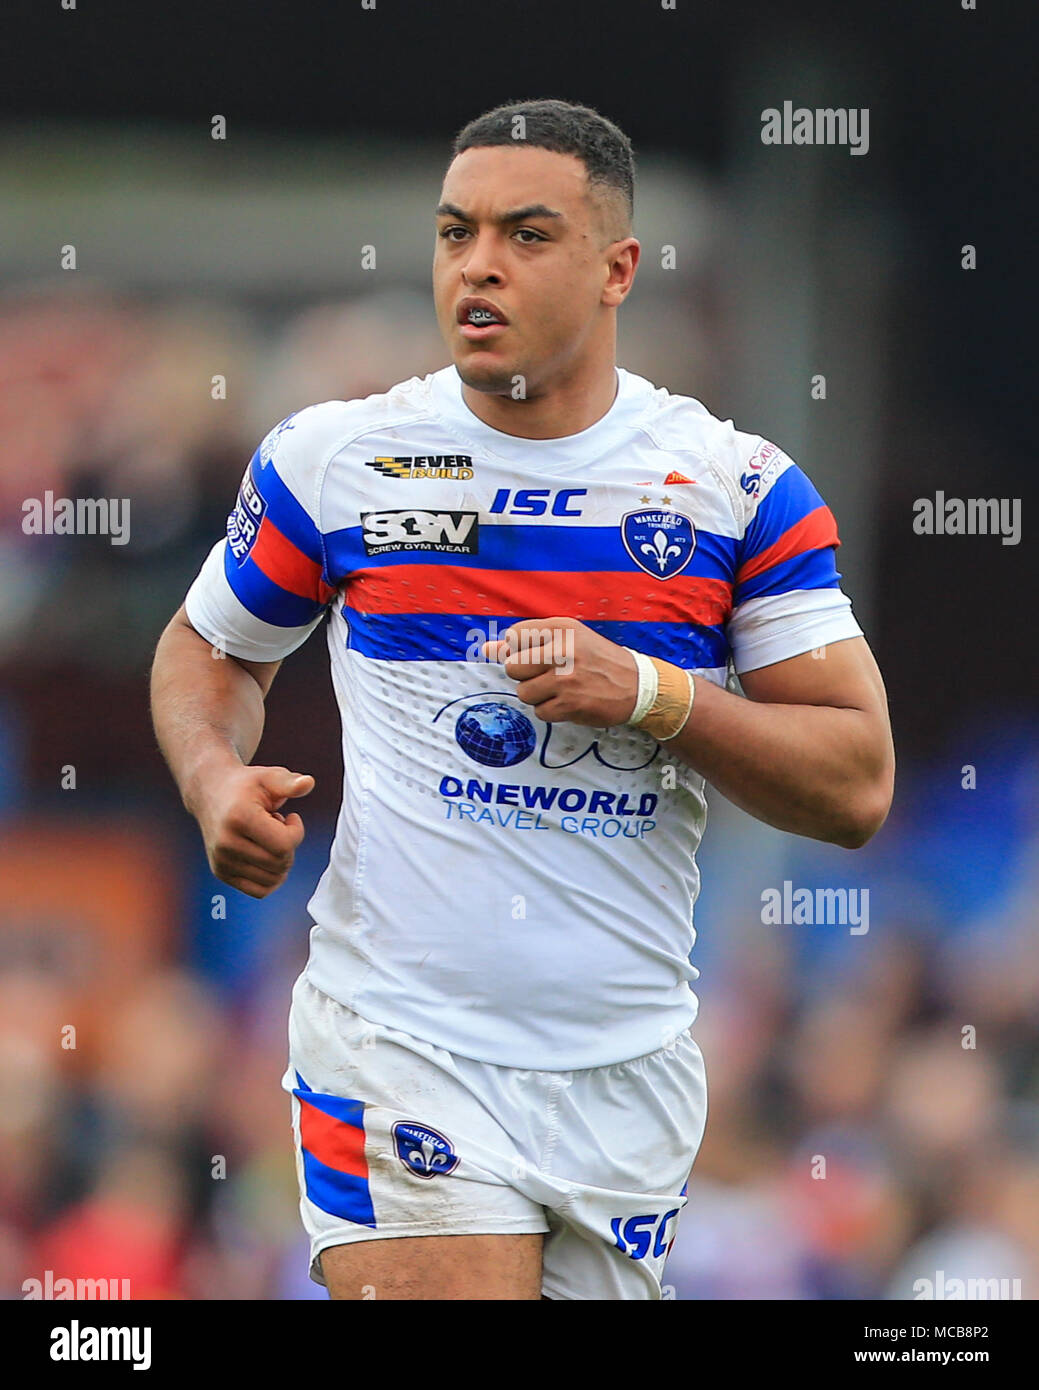 8th April 2018, Beaumont Legal Stadium, Wakefield, England; Betfred Super League rugby, Wakefield Trinity v St Helens; Reece Lyne of Wakefield Trinity Credit: News Images/Alamy Live News Stock Photo